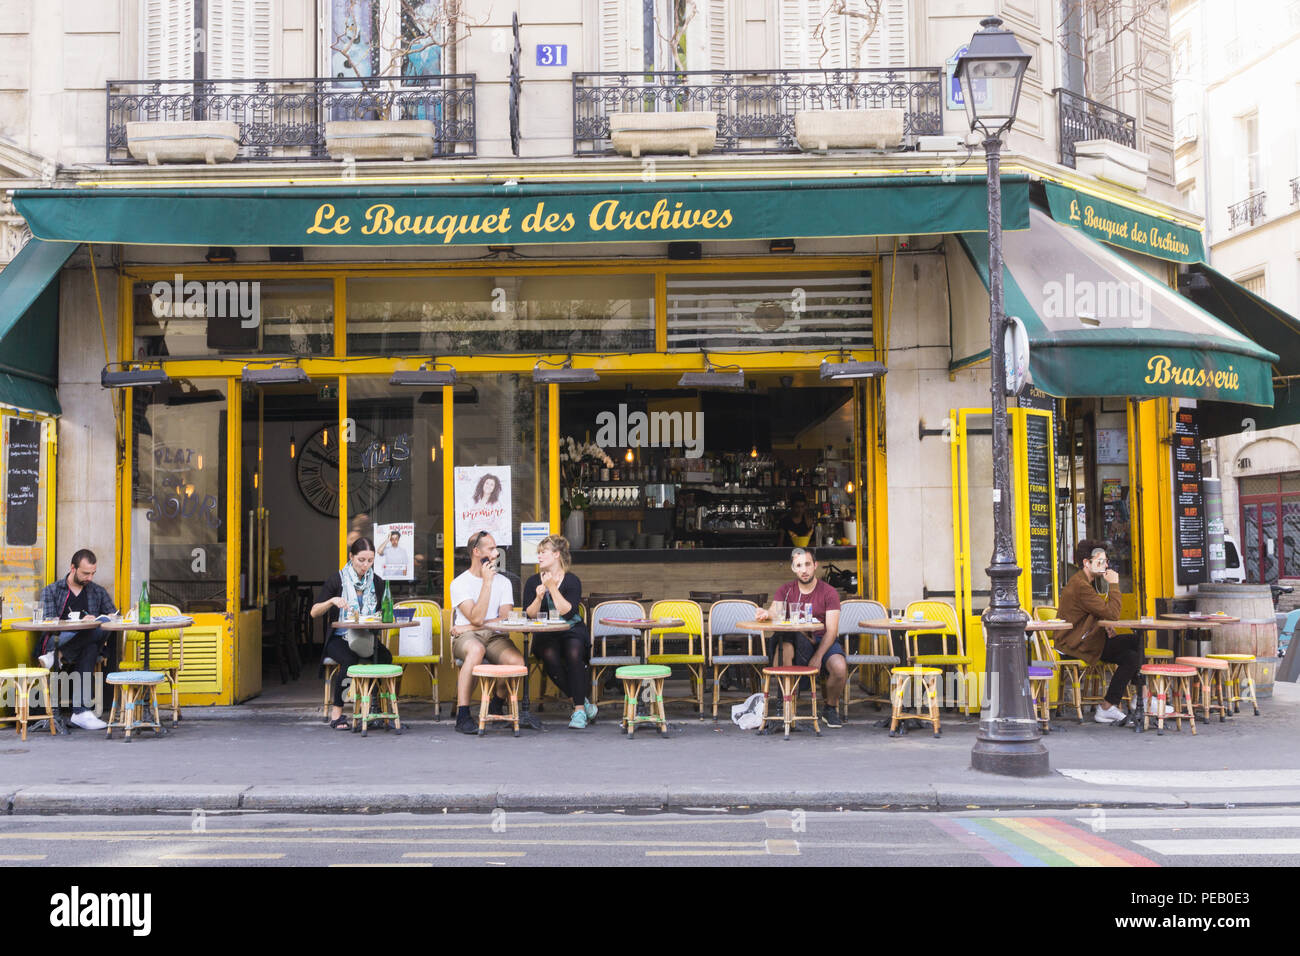 People enjoying afternoon drinks at Le Bouquet des Archives brasserie in the Marais district of Paris, France. Stock Photo